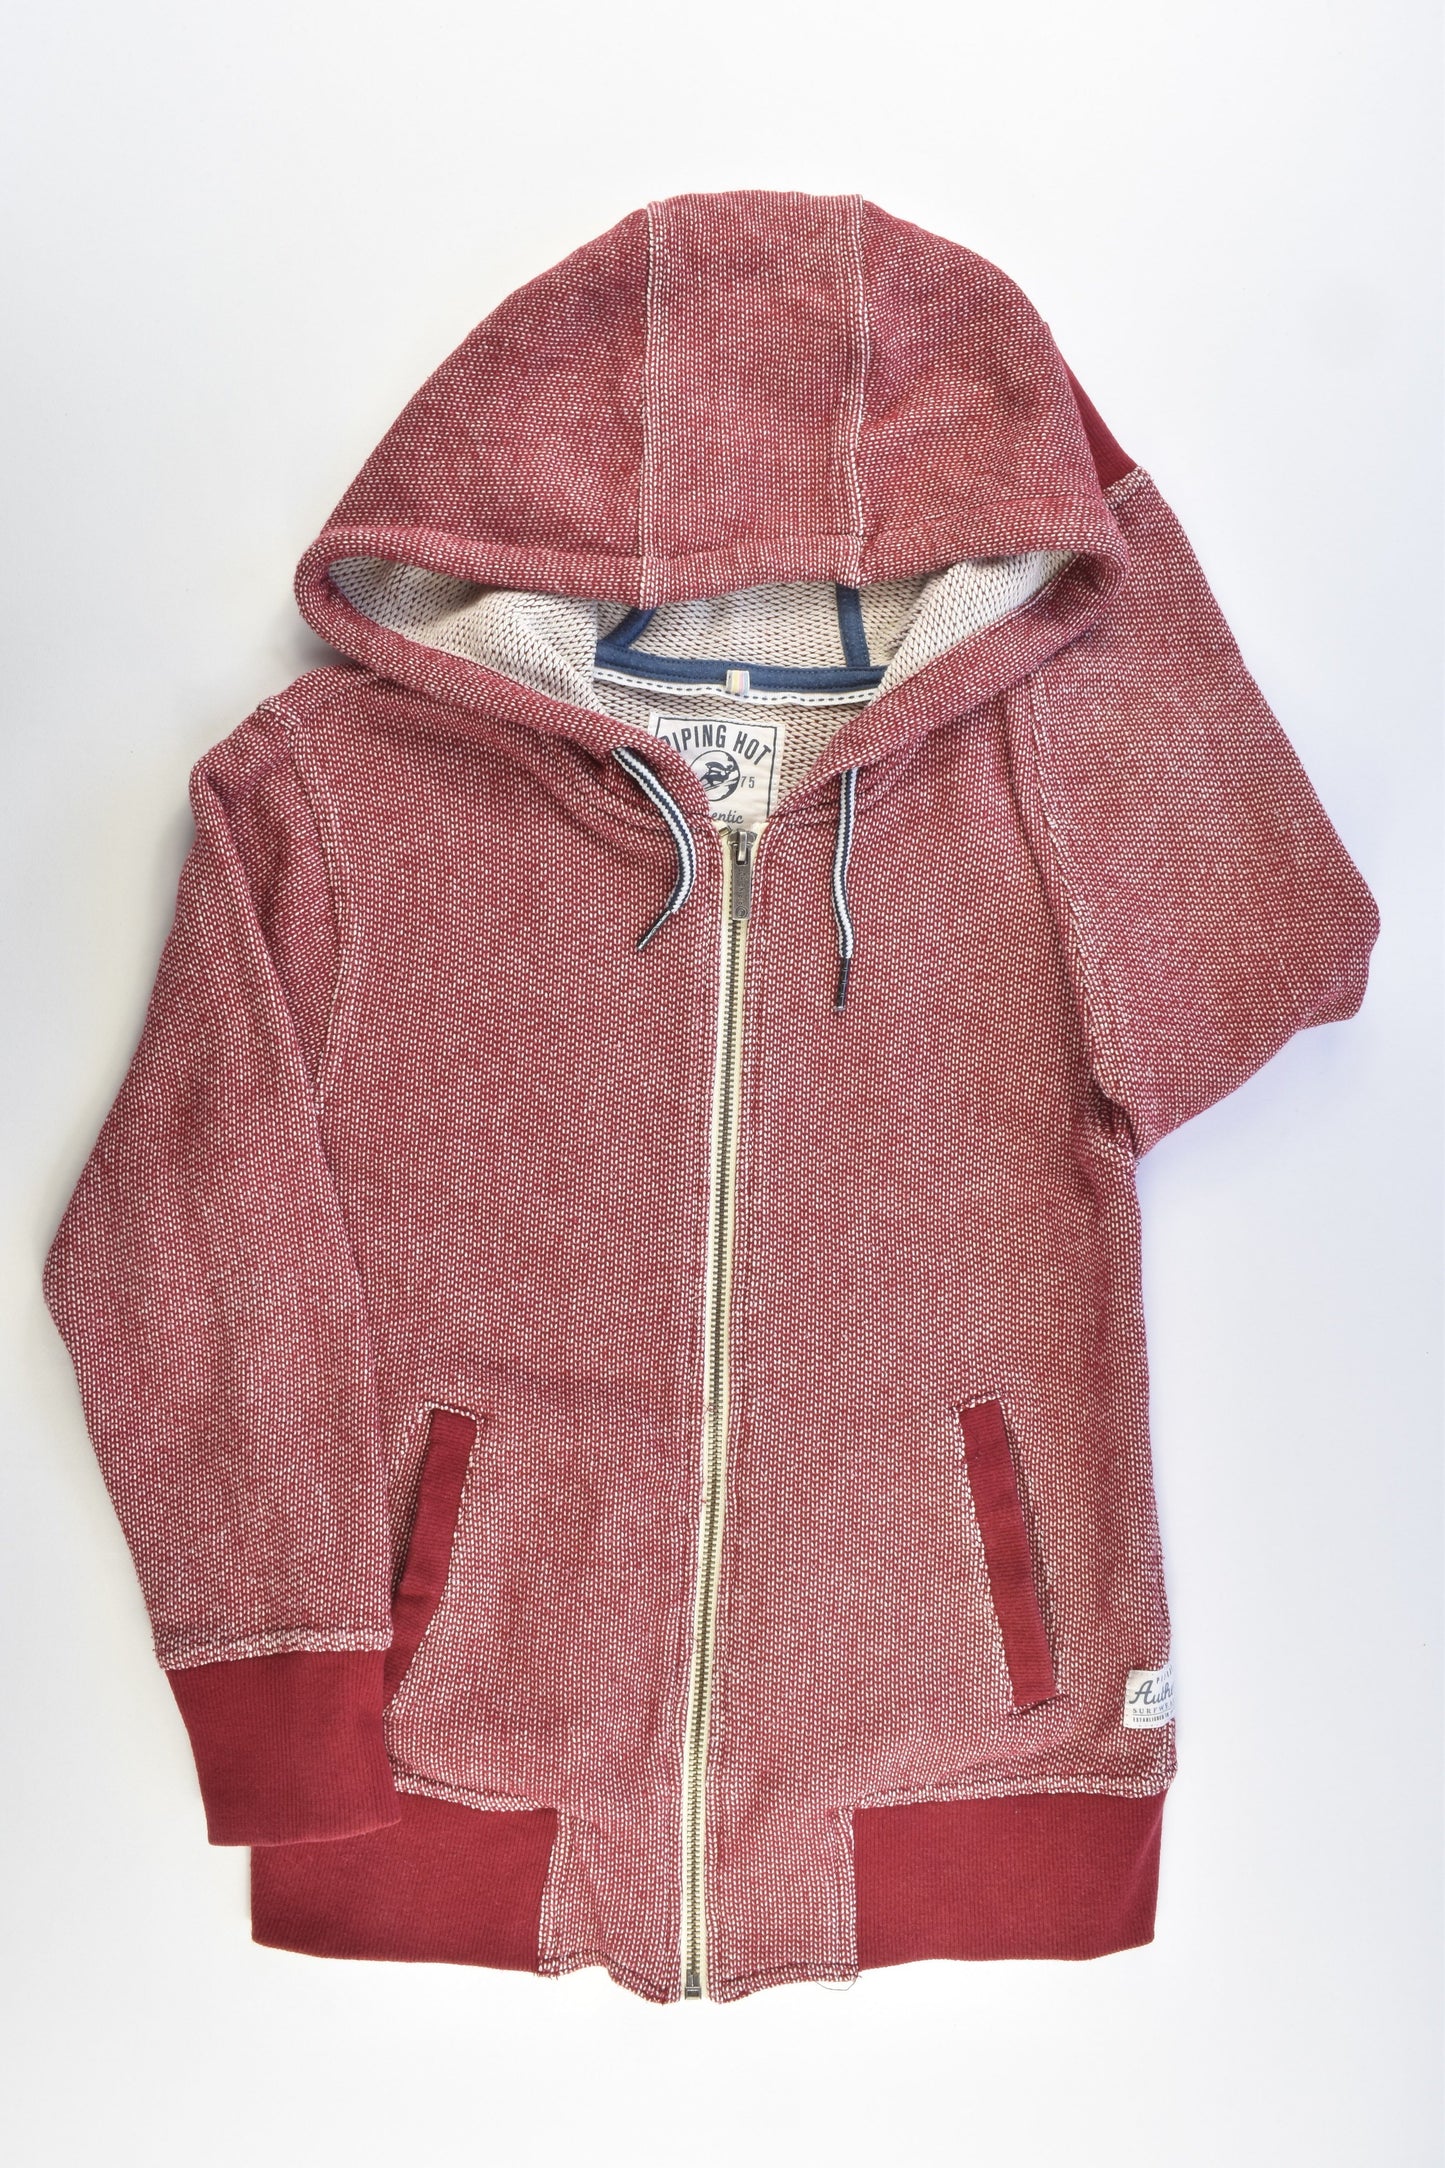 Piping Hot Size 8 Hooded Jumper